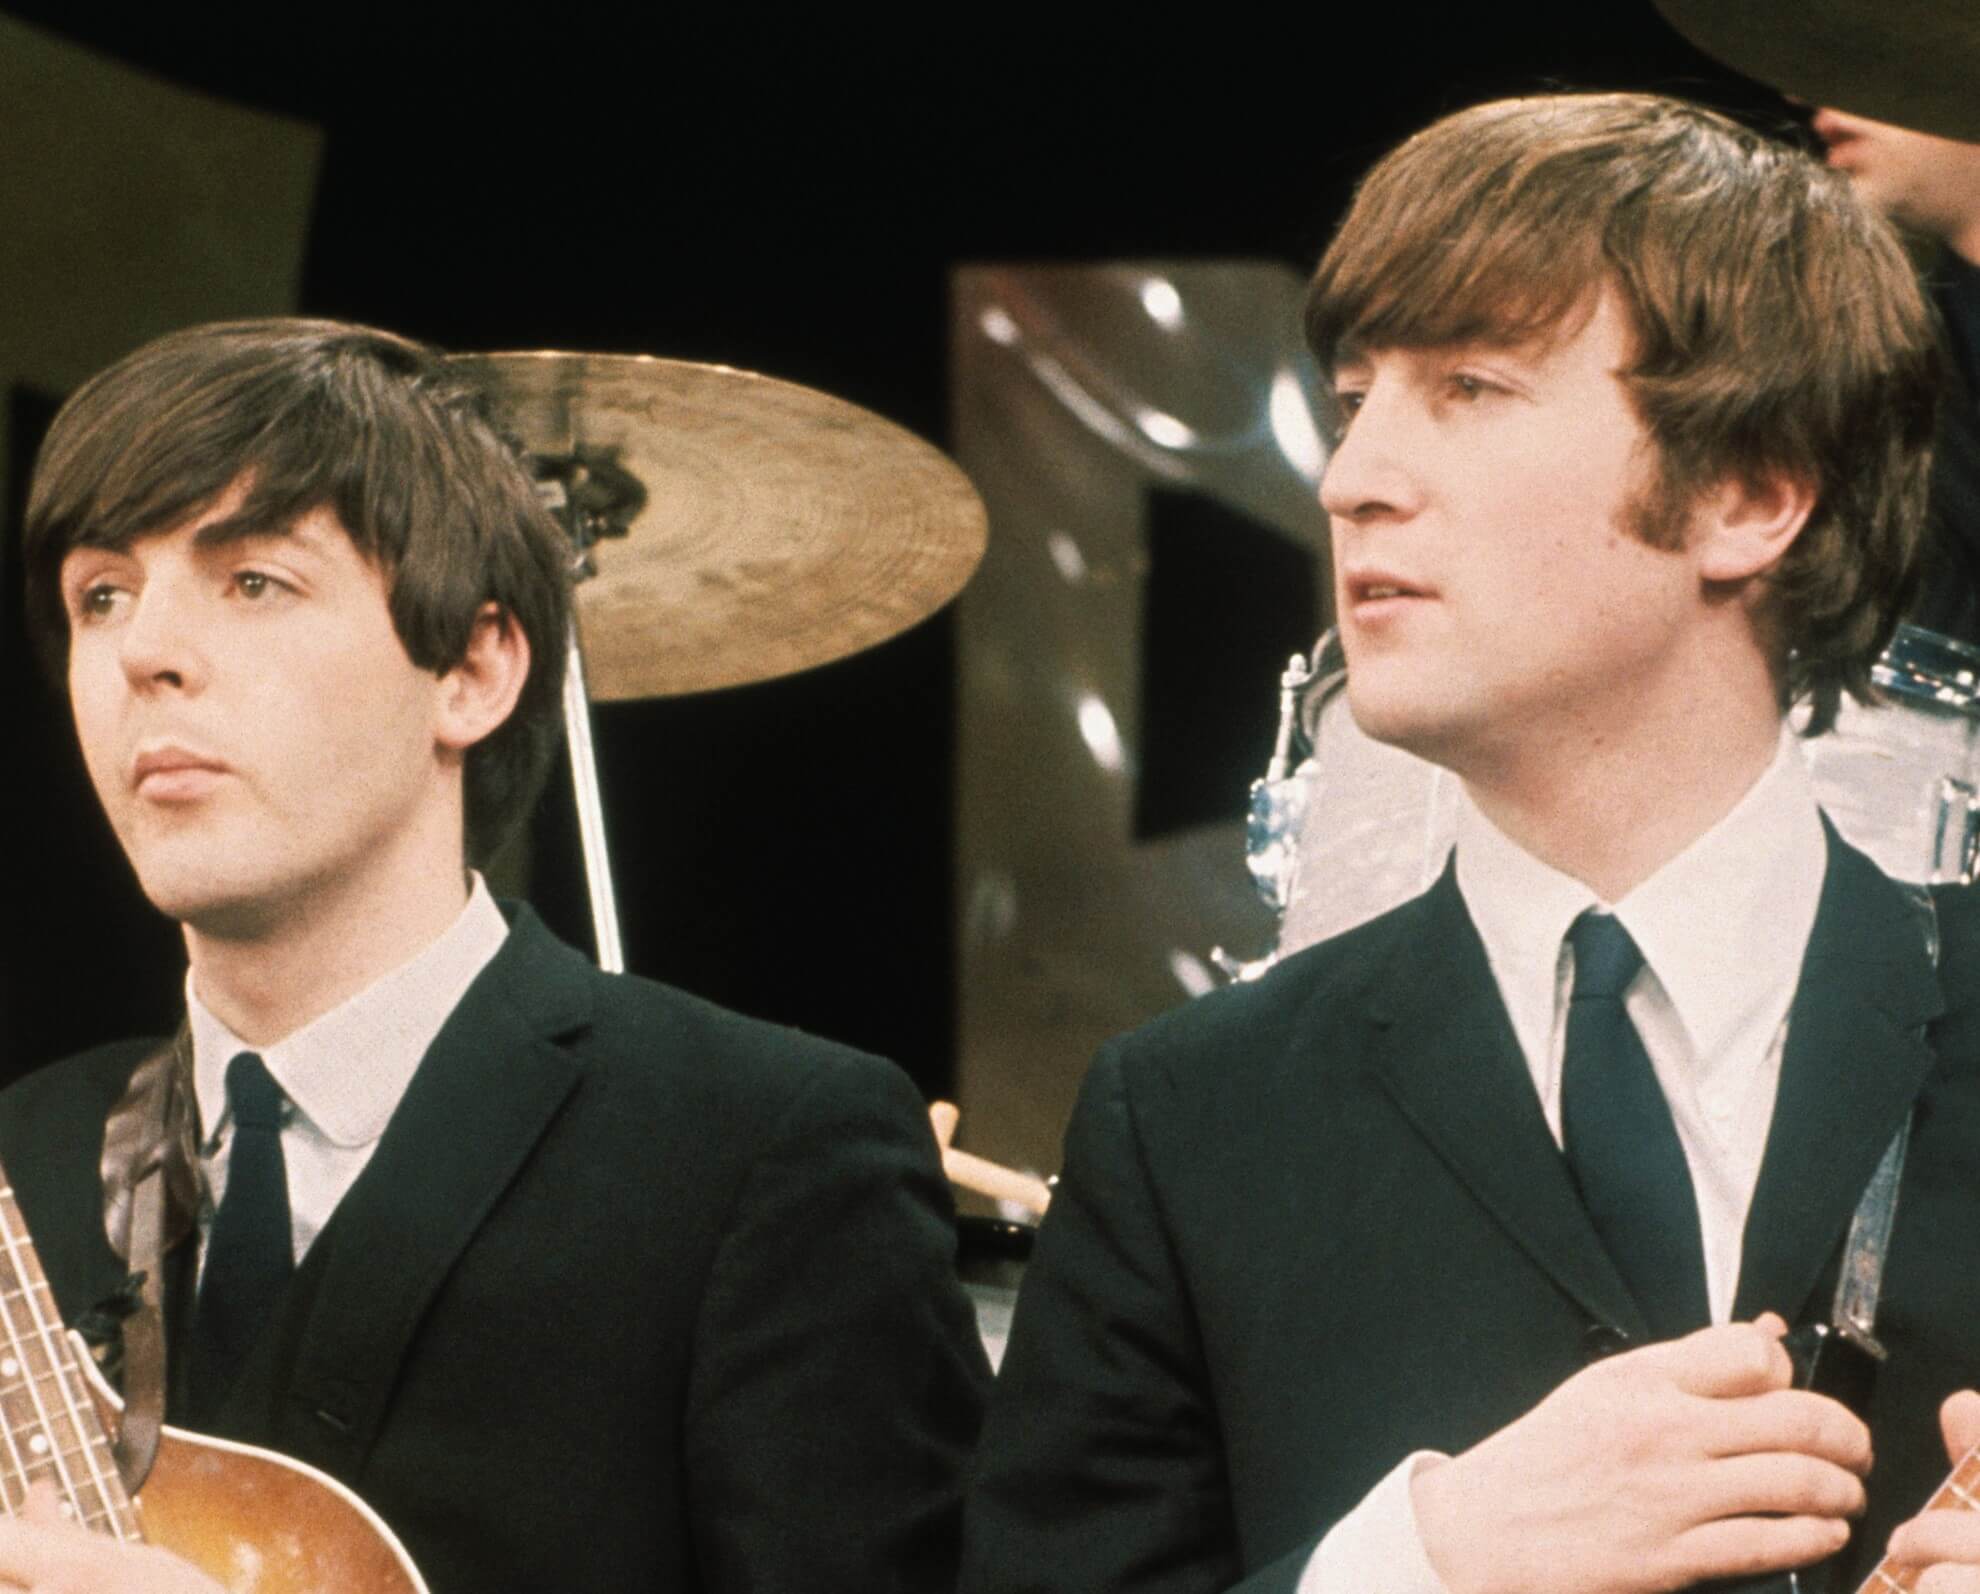 Paul McCartney and John Lennon during The Beatles' "Can't By Me Love" era